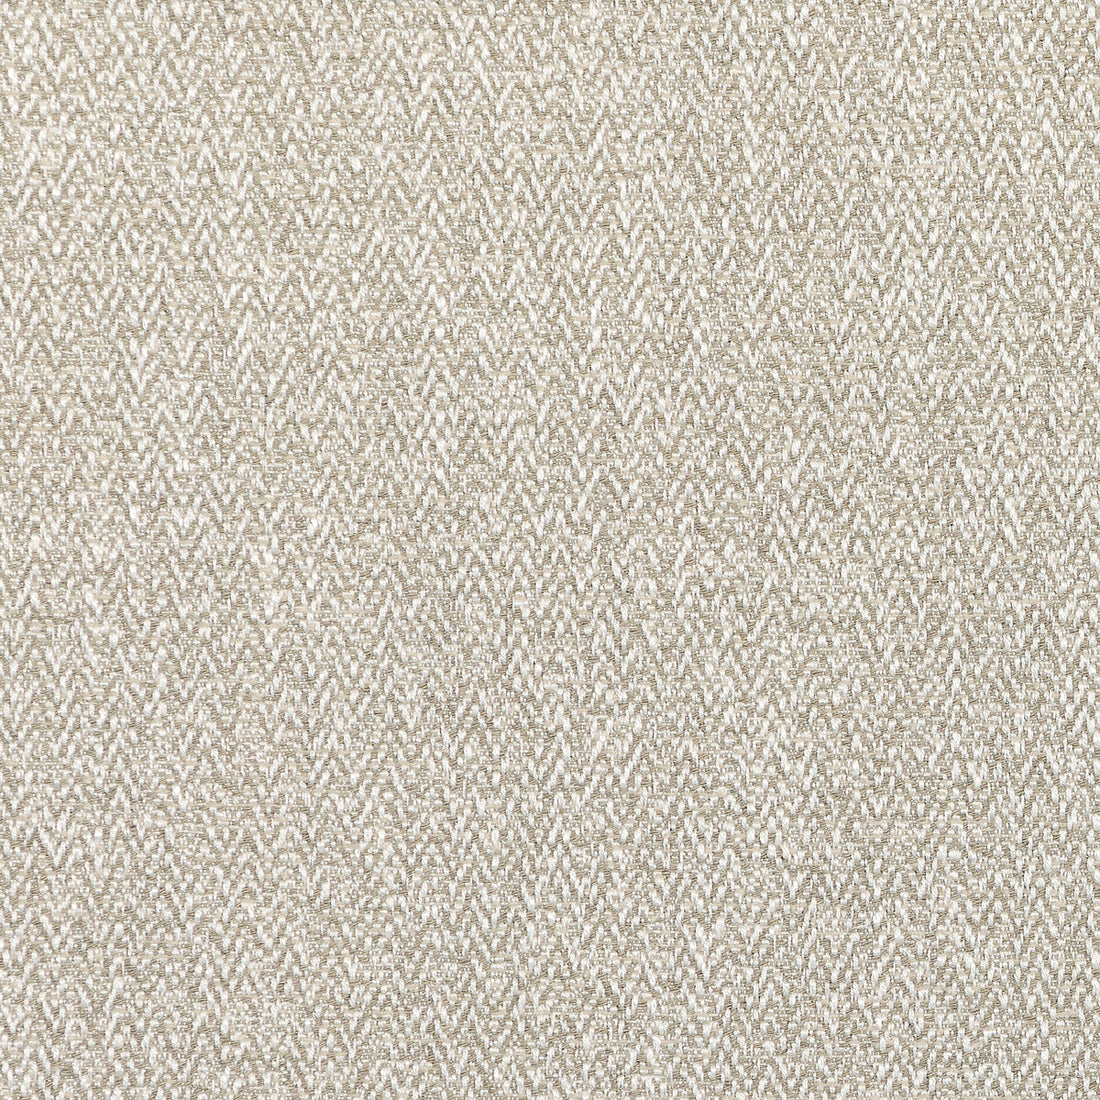 Saumur fabric in natural color - pattern 36107.106.0 - by Kravet Couture in the Luxury Textures II collection